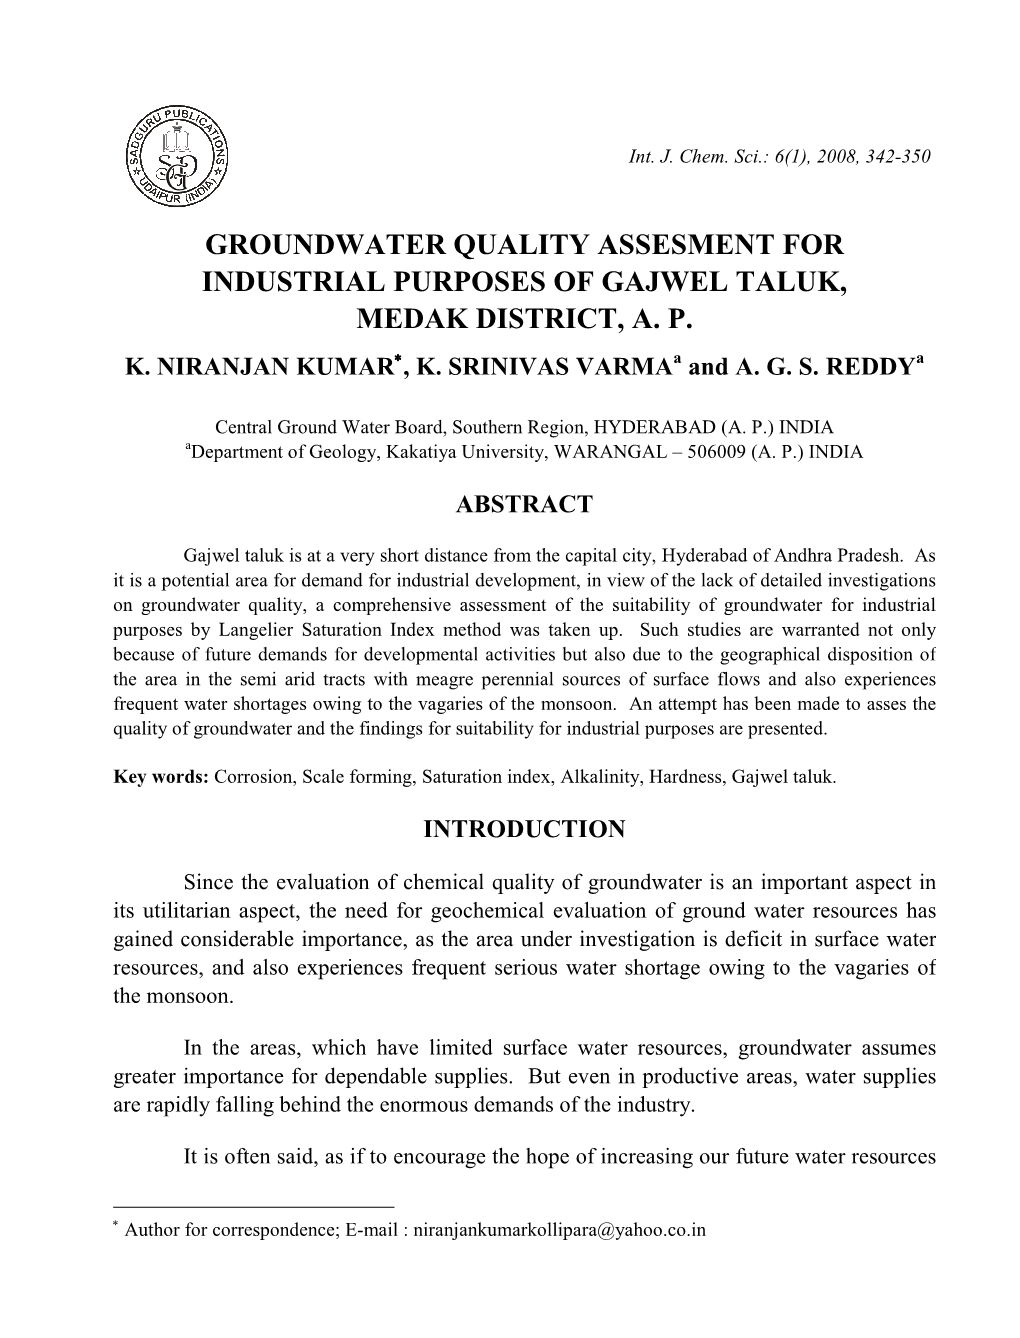 Groundwater Quality Assesment for Industrial Purposes of Gajwel Taluk, Medak District, A